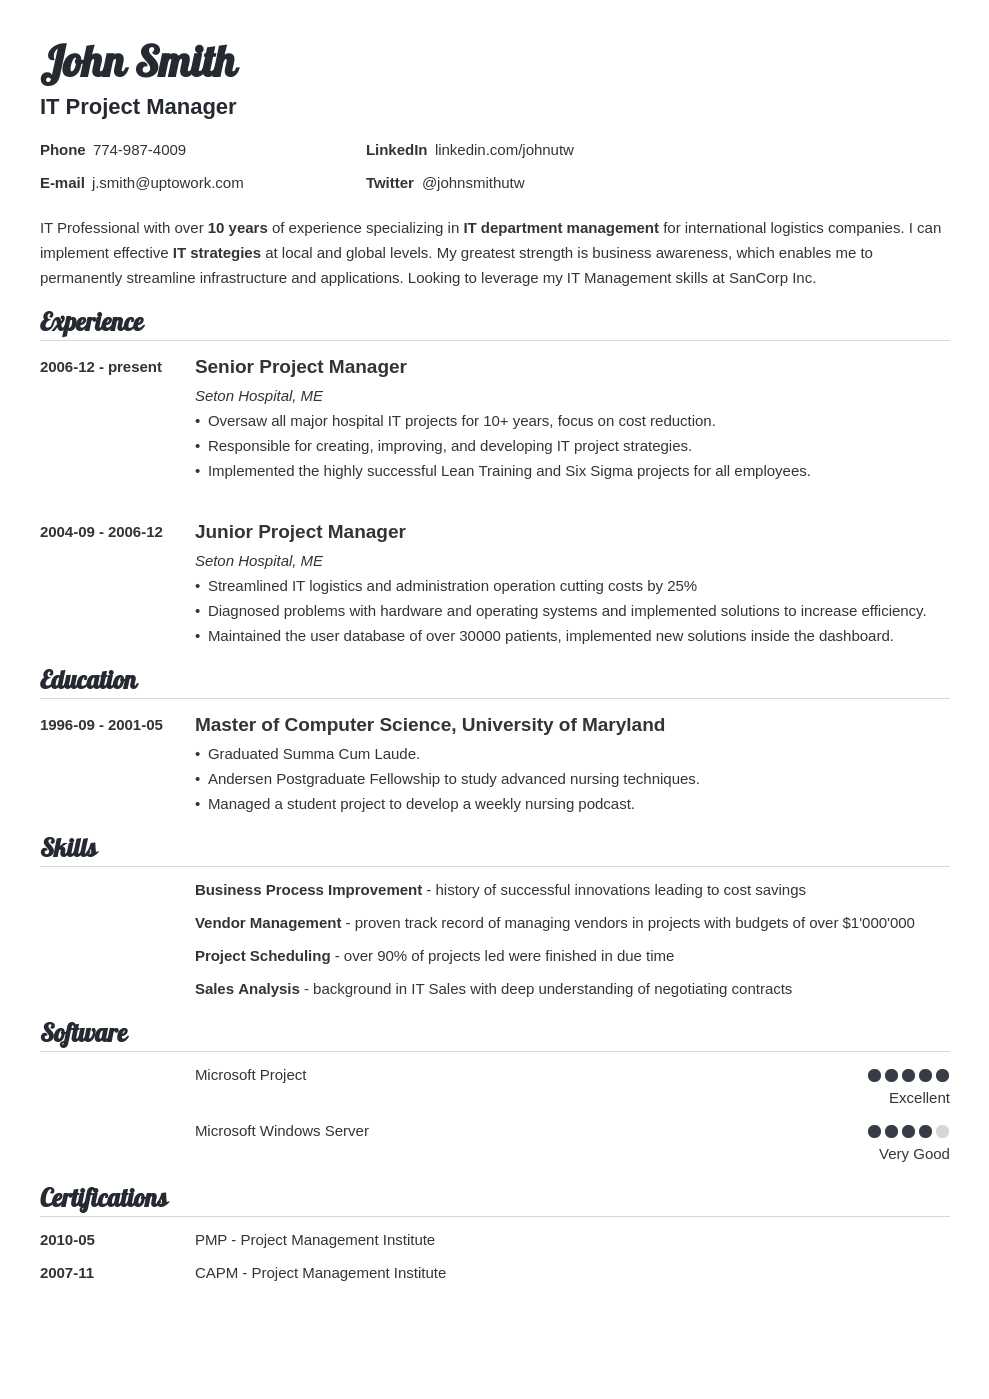 15+ Blank Resume Templates & Forms To Fill In And Download Throughout Free Blank Cv Template Download